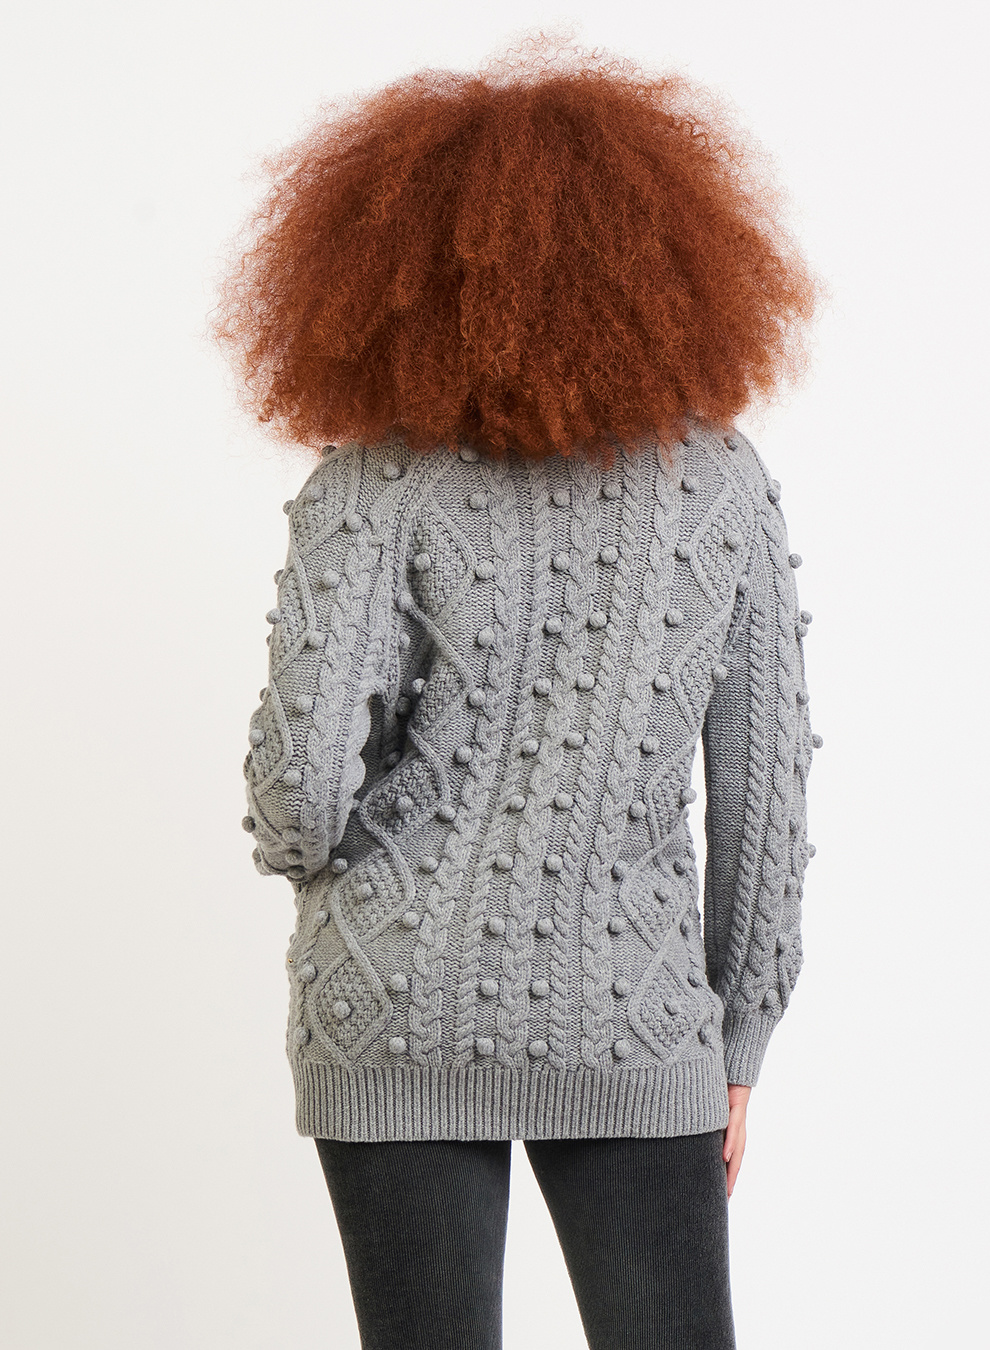 CABLE KNIT POM POM BUTTON FRONT CARDIAN SWEATER